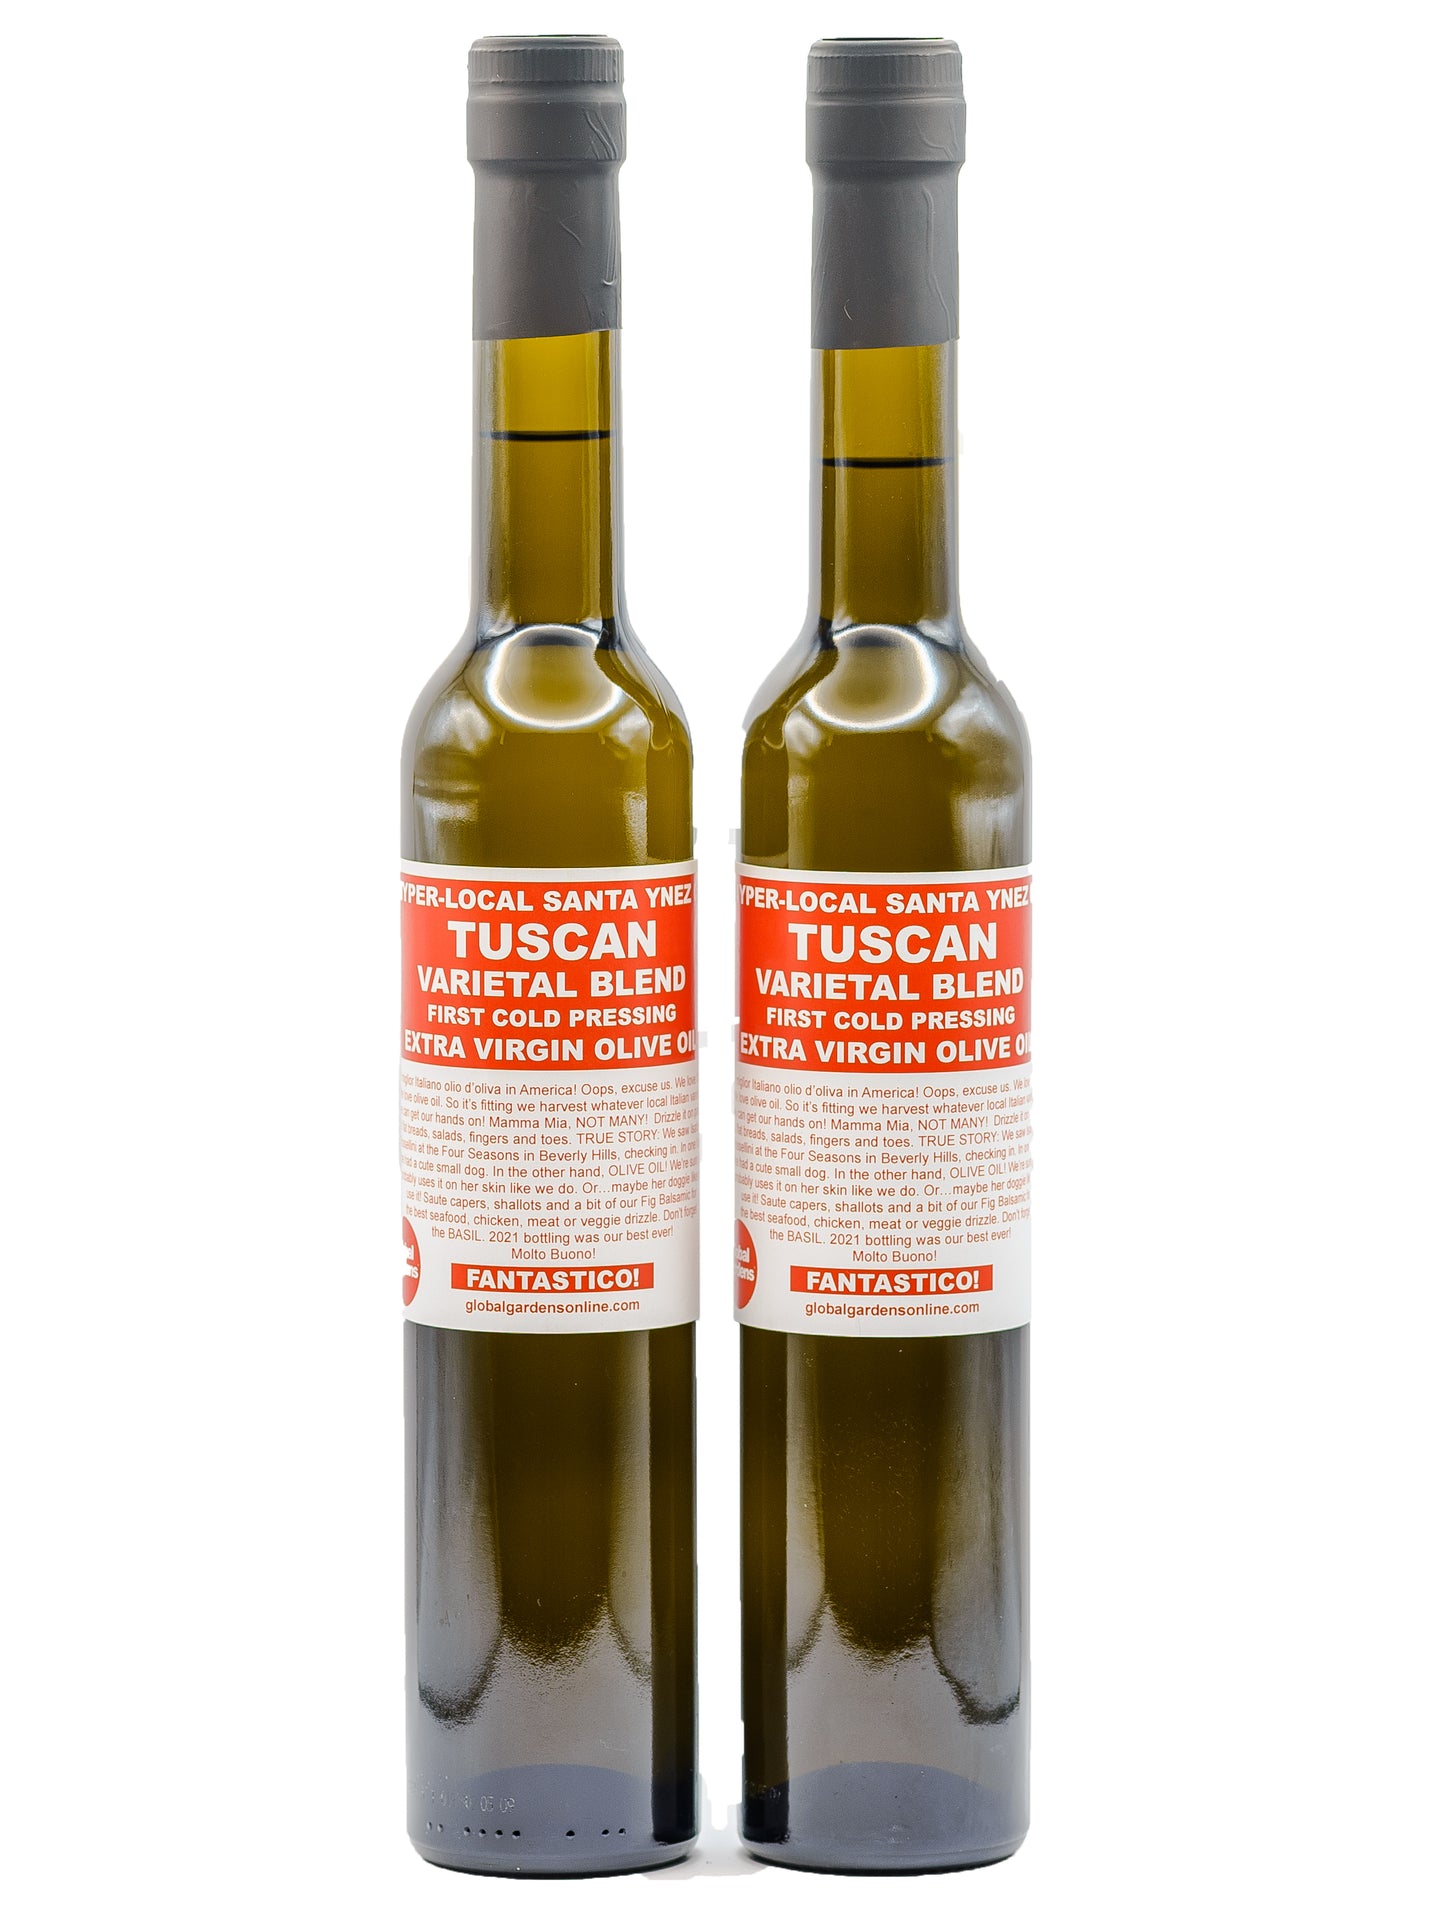 Hyper Local Tuscan Duo Buy One GET ONE FREE